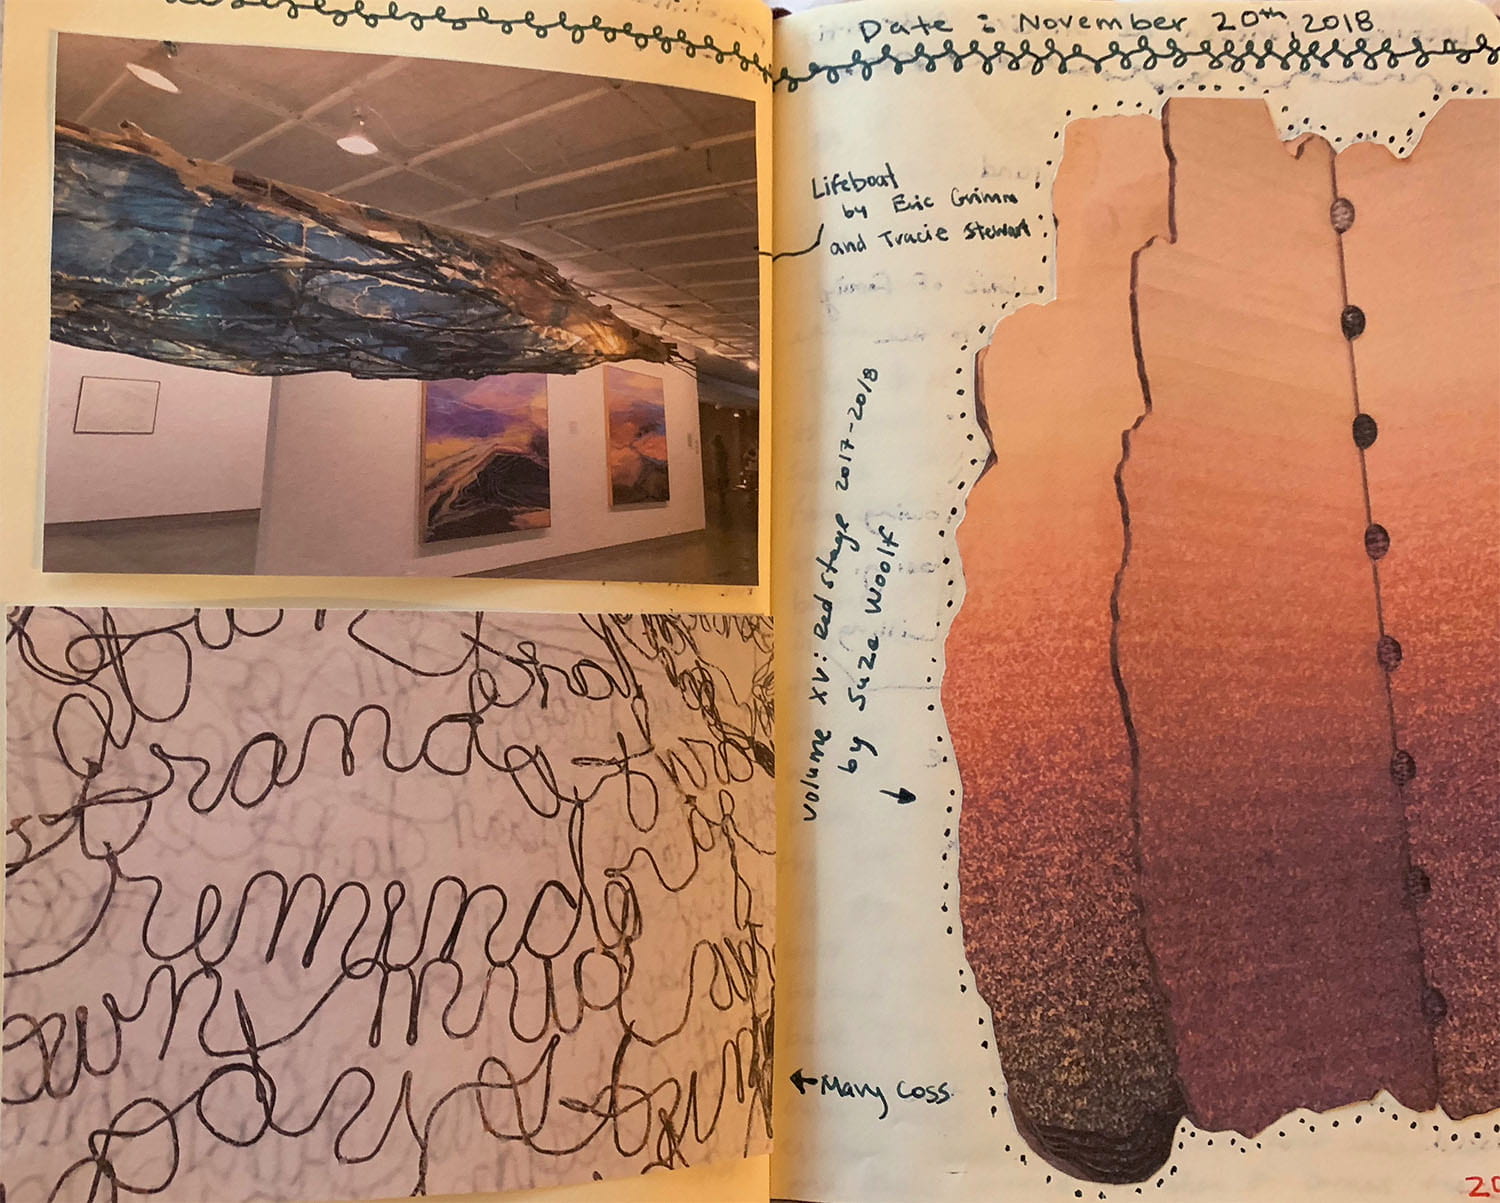 two pages in a scrapbook with a photo of a gallery exhibition, some scribbled, illegible words, and a cutout of something redish brown with a smooth but grainy texture